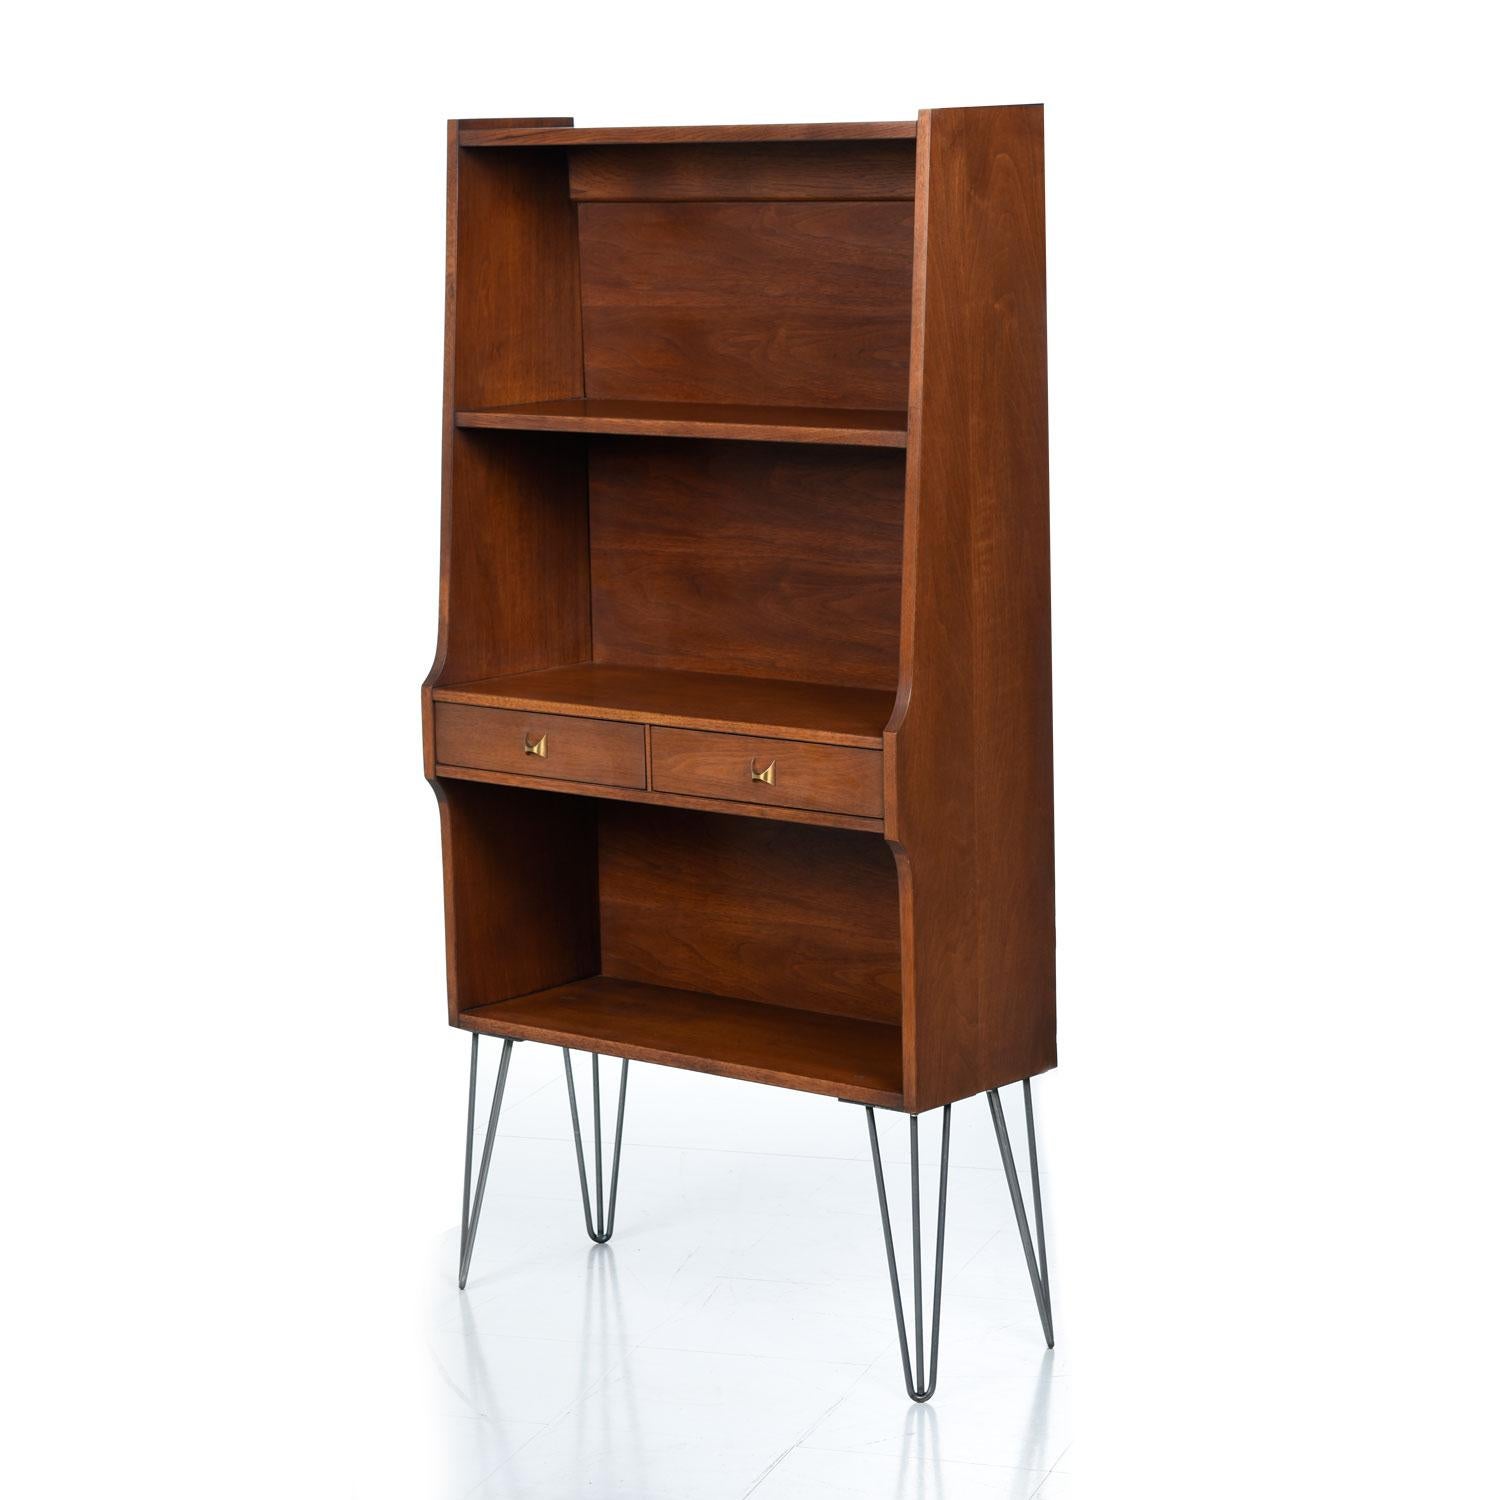 These three Broyhill Brasilia bookcases have been updated with stylish, heavy duty and period appropriate hairpin legs. The walnut wood veneer exhibits fiery grain walnut. The deep chocolate brown patina comes from decades of aging with loving care.